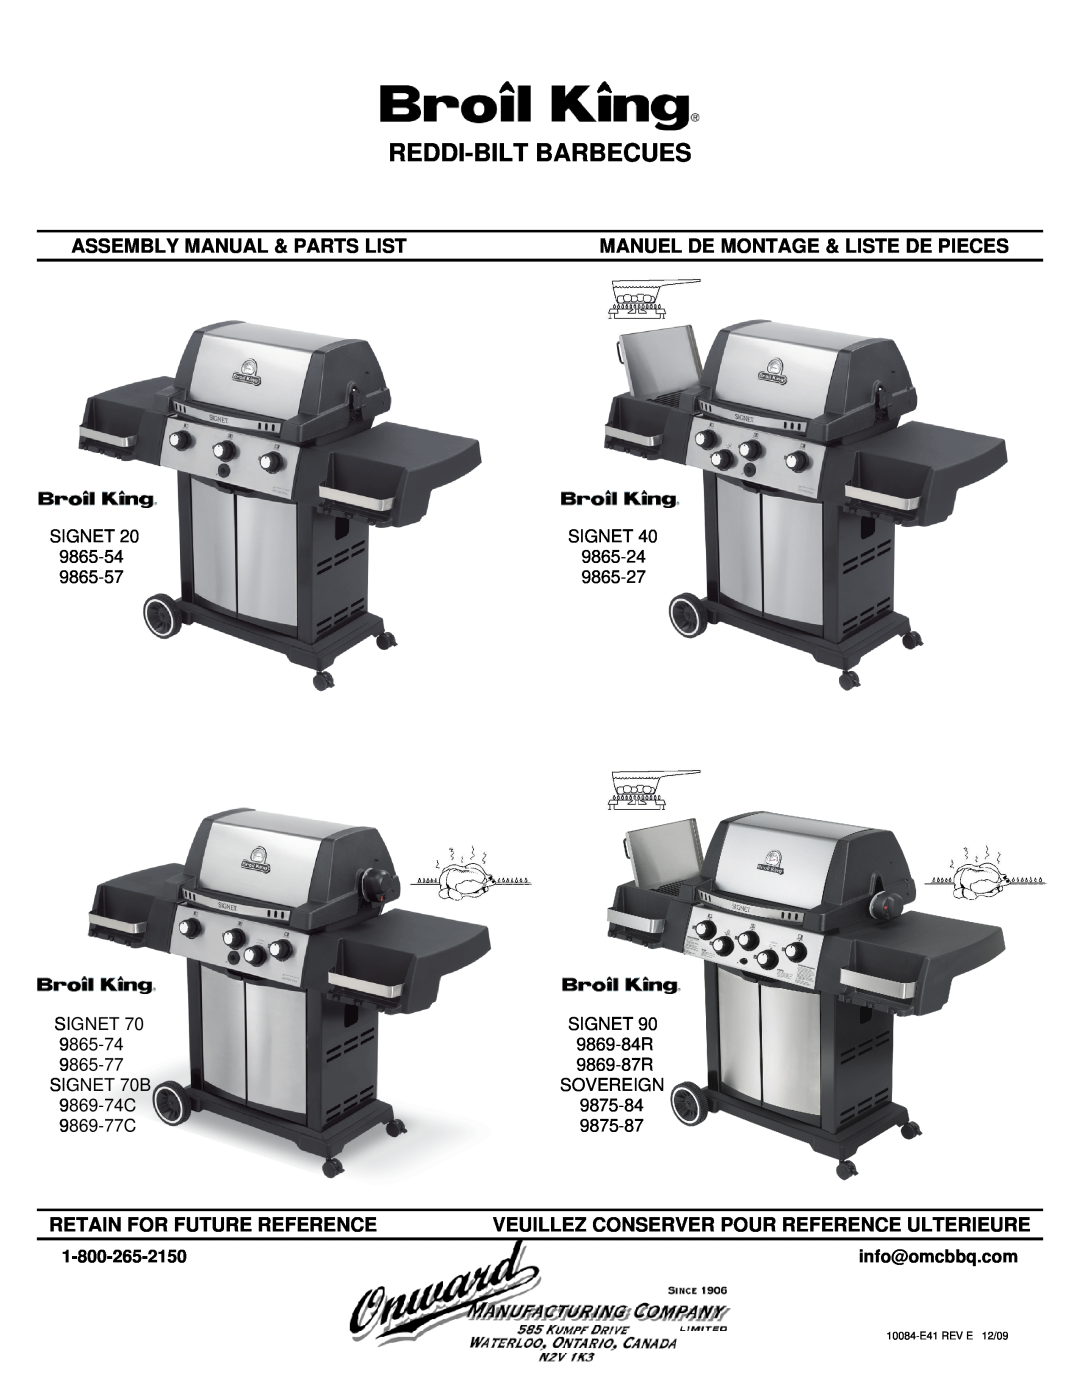 Broil King 9865-57 manual info@omcbbq.com, Reddi-Bilt Barbecues, Assembly Manual & Parts List, Retain For Future Reference 